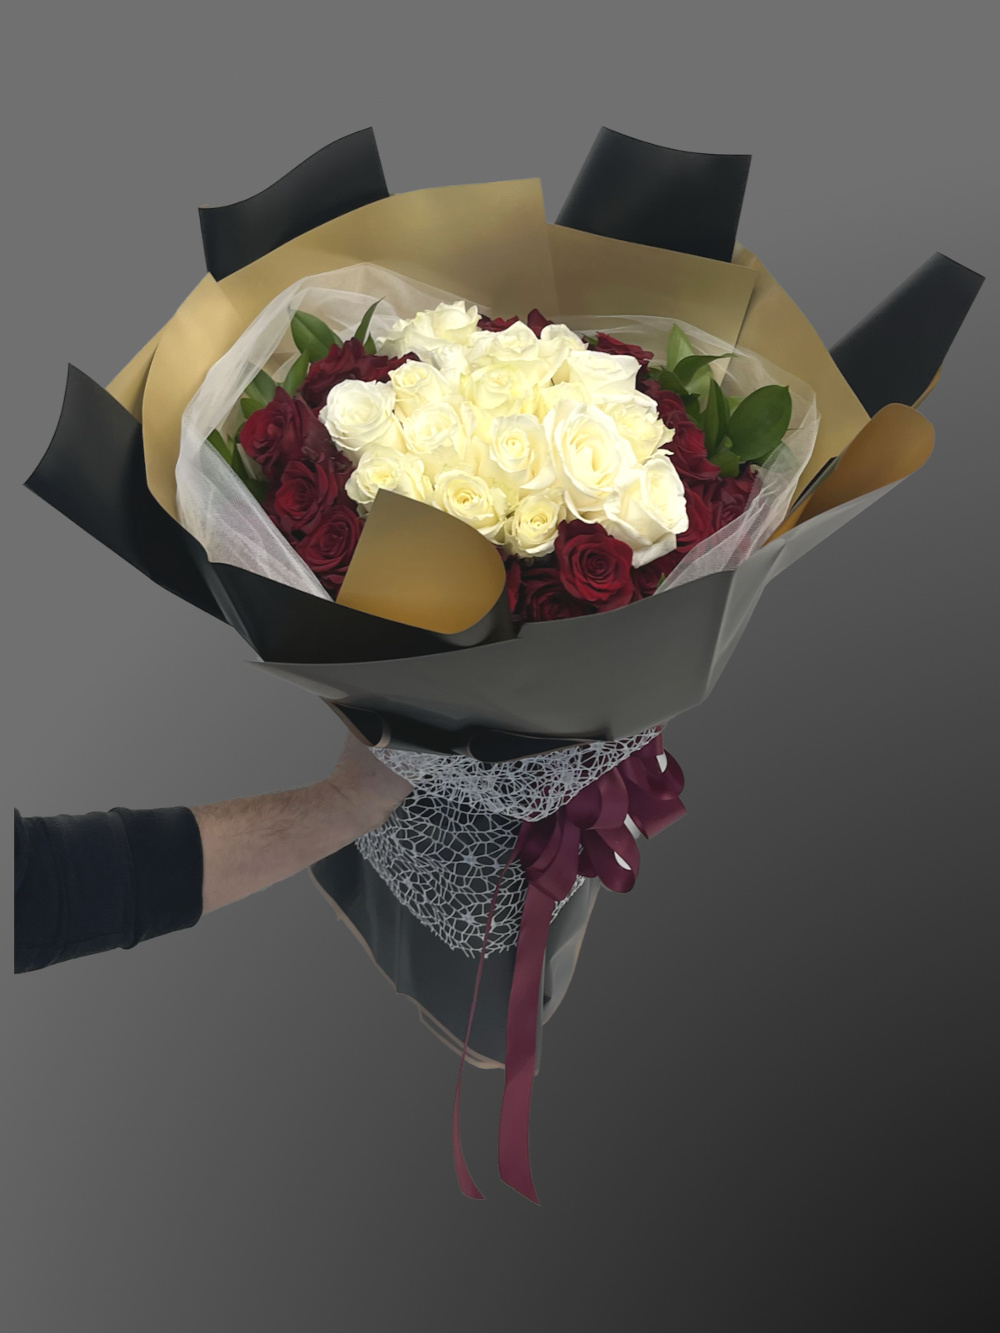 Fifty Shades of Love Bouquet